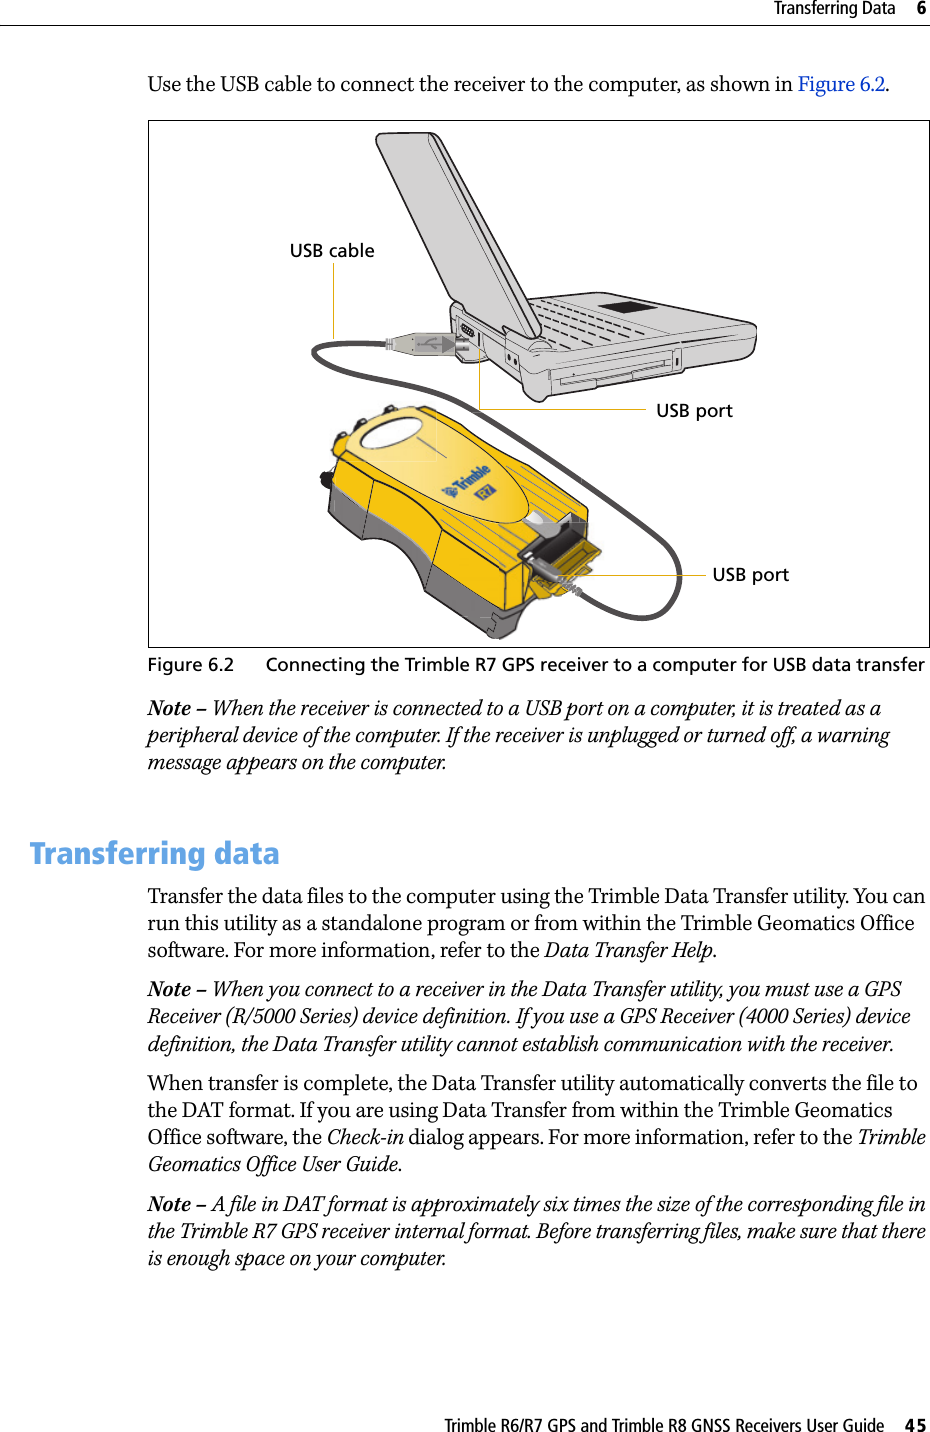 Trimble R6/R7 GPS and Trimble R8 GNSS Receivers User Guide     45Transferring Data     6Trimble R7 GPS Receiver Operation Use the USB cable to connect the receiver to the computer, as shown in Figure 6.2.Figure 6.2 Connecting the Trimble R7 GPS receiver to a computer for USB data transfer Note – When the receiver is connected to a USB port on a computer, it is treated as a peripheral device of the computer. If the receiver is unplugged or turned off, a warning message appears on the computer.6.2 Transferring dataTransfer the data files to the computer using the Trimble Data Transfer utility. You can run this utility as a standalone program or from within the Trimble Geomatics Office software. For more information, refer to the Data Transfer Help.Note – When you connect to a receiver in the Data Transfer utility, you must use a GPS Receiver (R/5000 Series) device definition. If you use a GPS Receiver (4000 Series) device definition, the Data Transfer utility cannot establish communication with the receiver.When transfer is complete, the Data Transfer utility automatically converts the file to the DAT format. If you are using Data Transfer from within the Trimble Geomatics Office software, the Check-in dialog appears. For more information, refer to the Trimble Geomatics Office User Guide.Note – A file in DAT format is approximately six times the size of the corresponding file in the Trimble R7 GPS receiver internal format. Before transferring files, make sure that there is enough space on your computer.USB cableUSB portUSB port